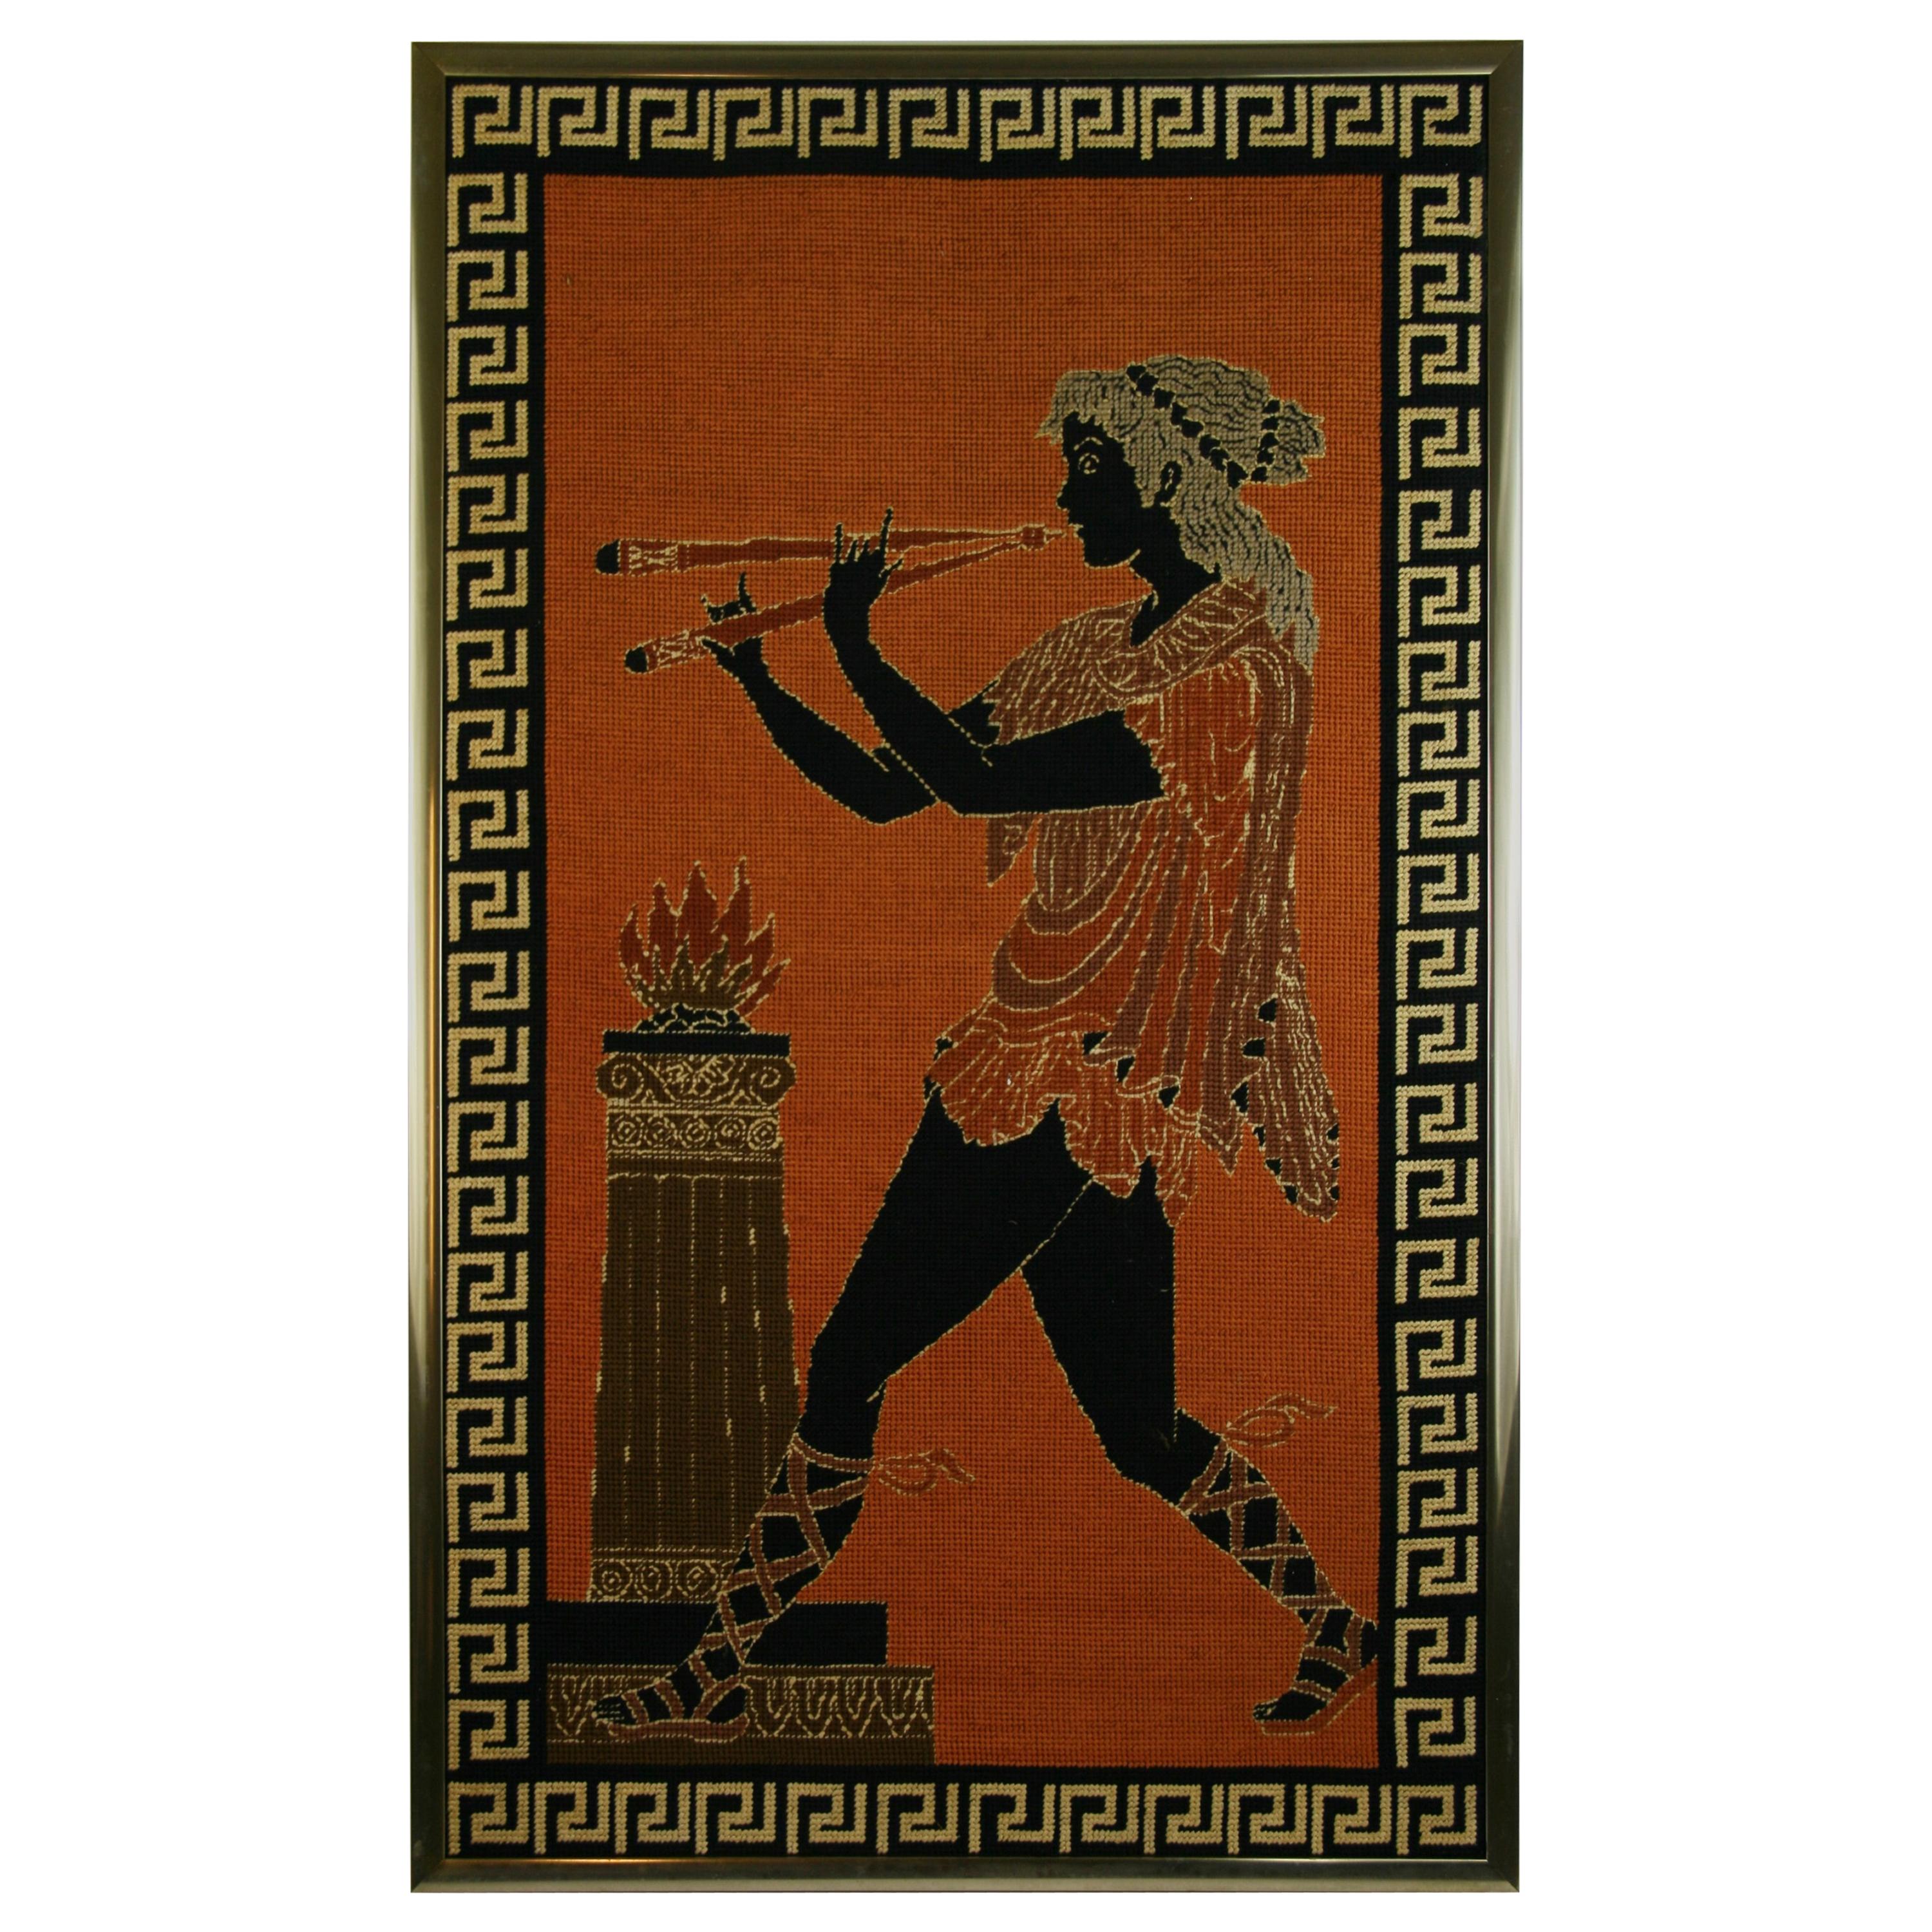 Flute Player Hand Woven Tapestry